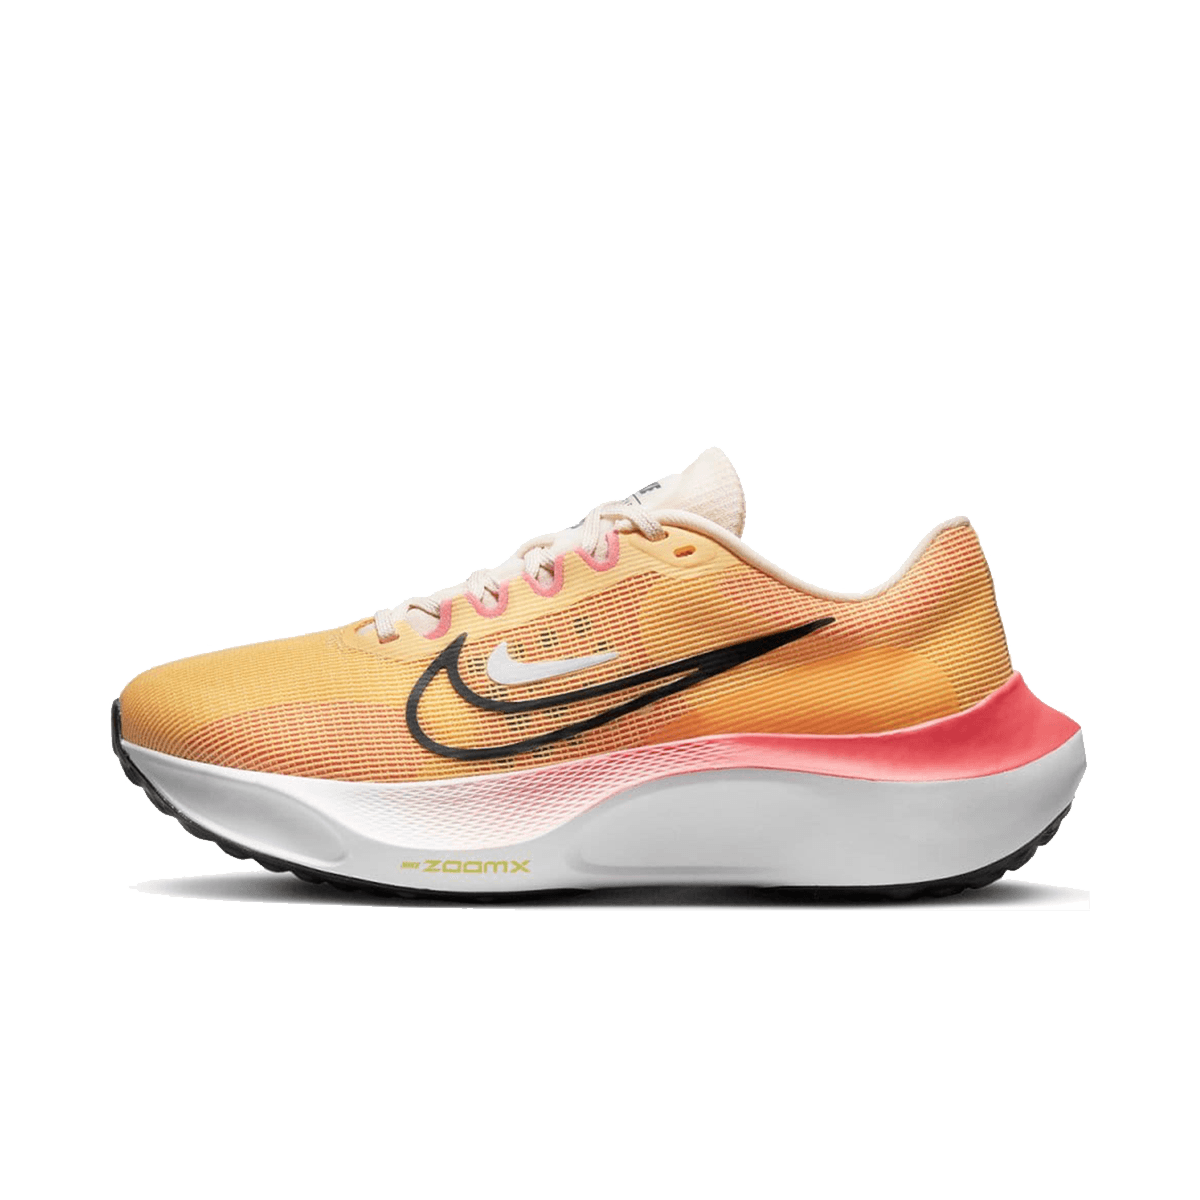 WMNS ZOOM FLY 5 Fly